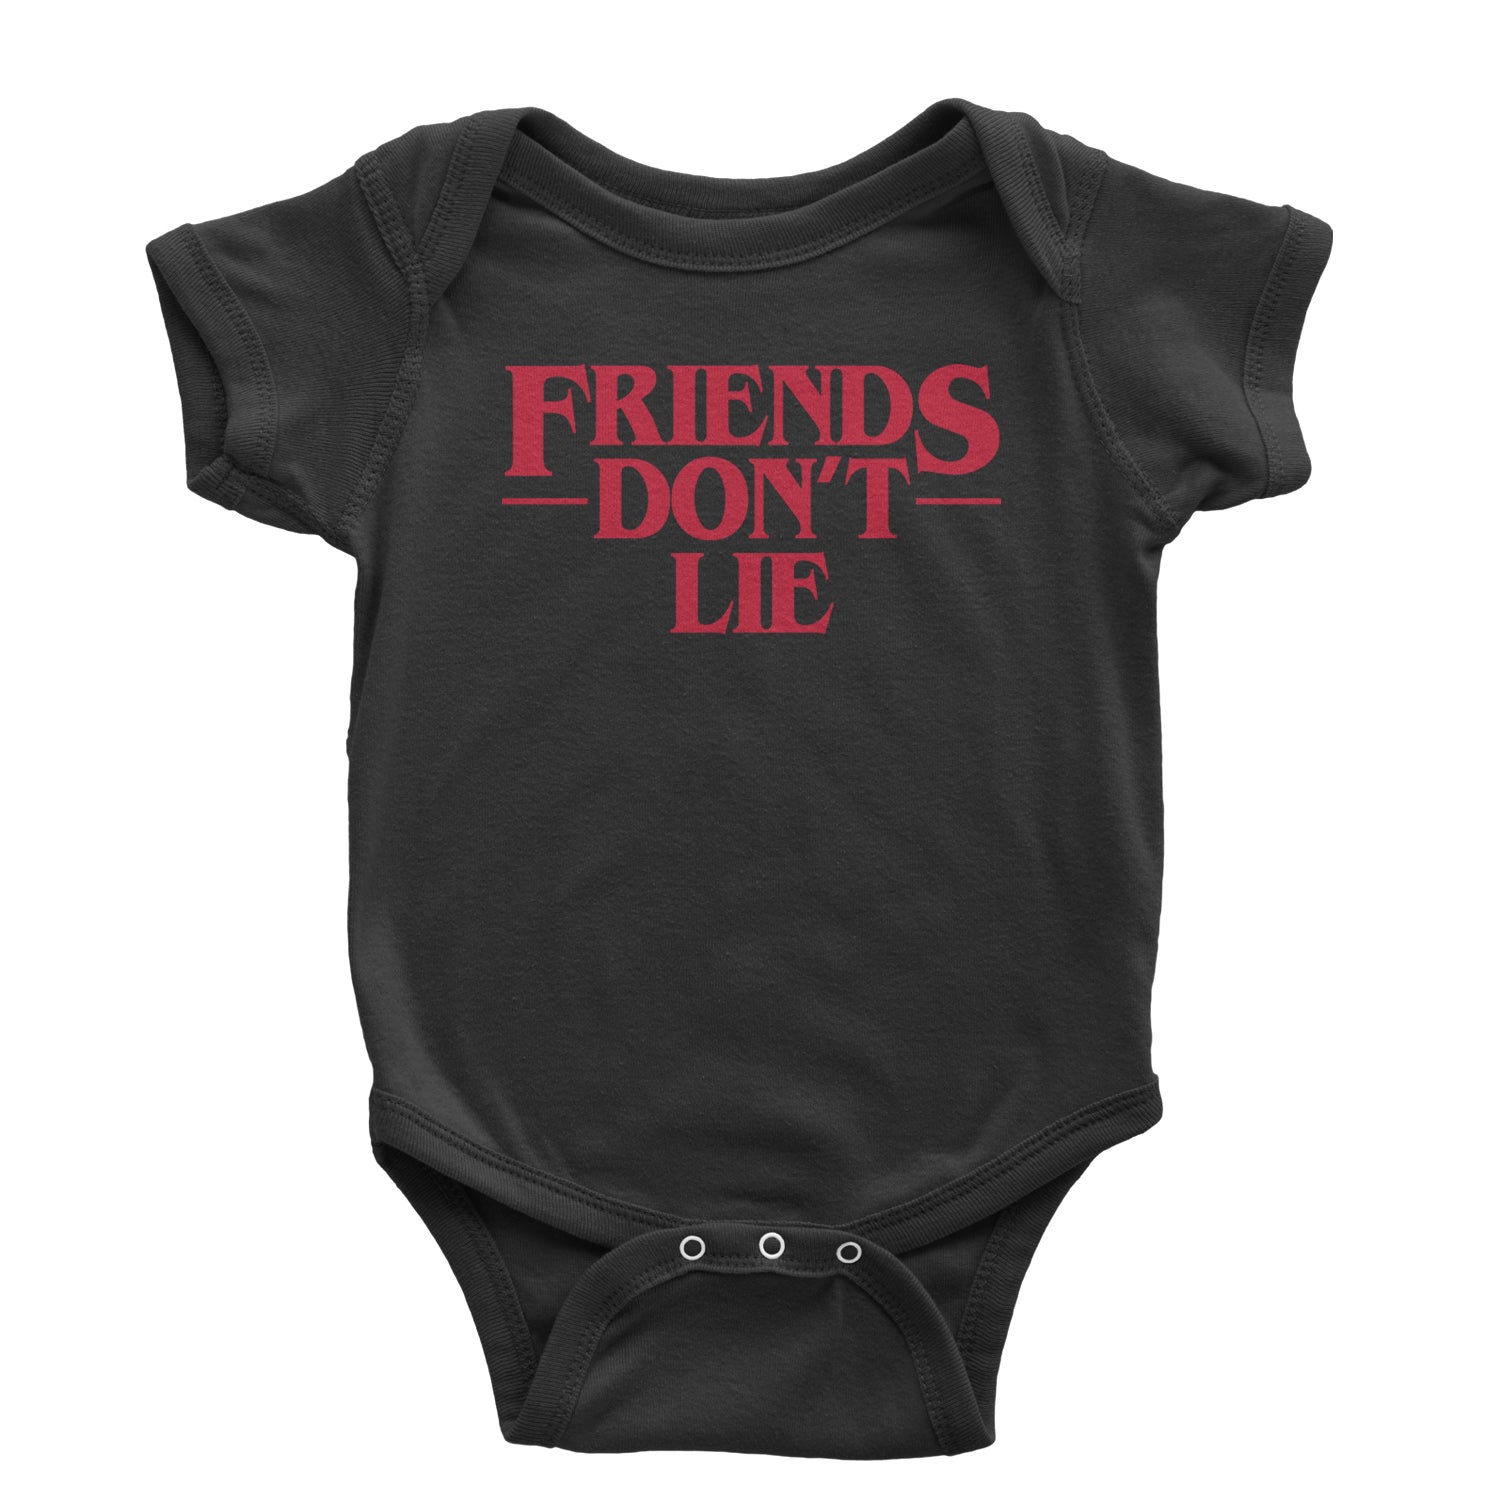 Friends Don’t Lie Infant One-Piece Romper Bodysuit and Toddler T-shirt